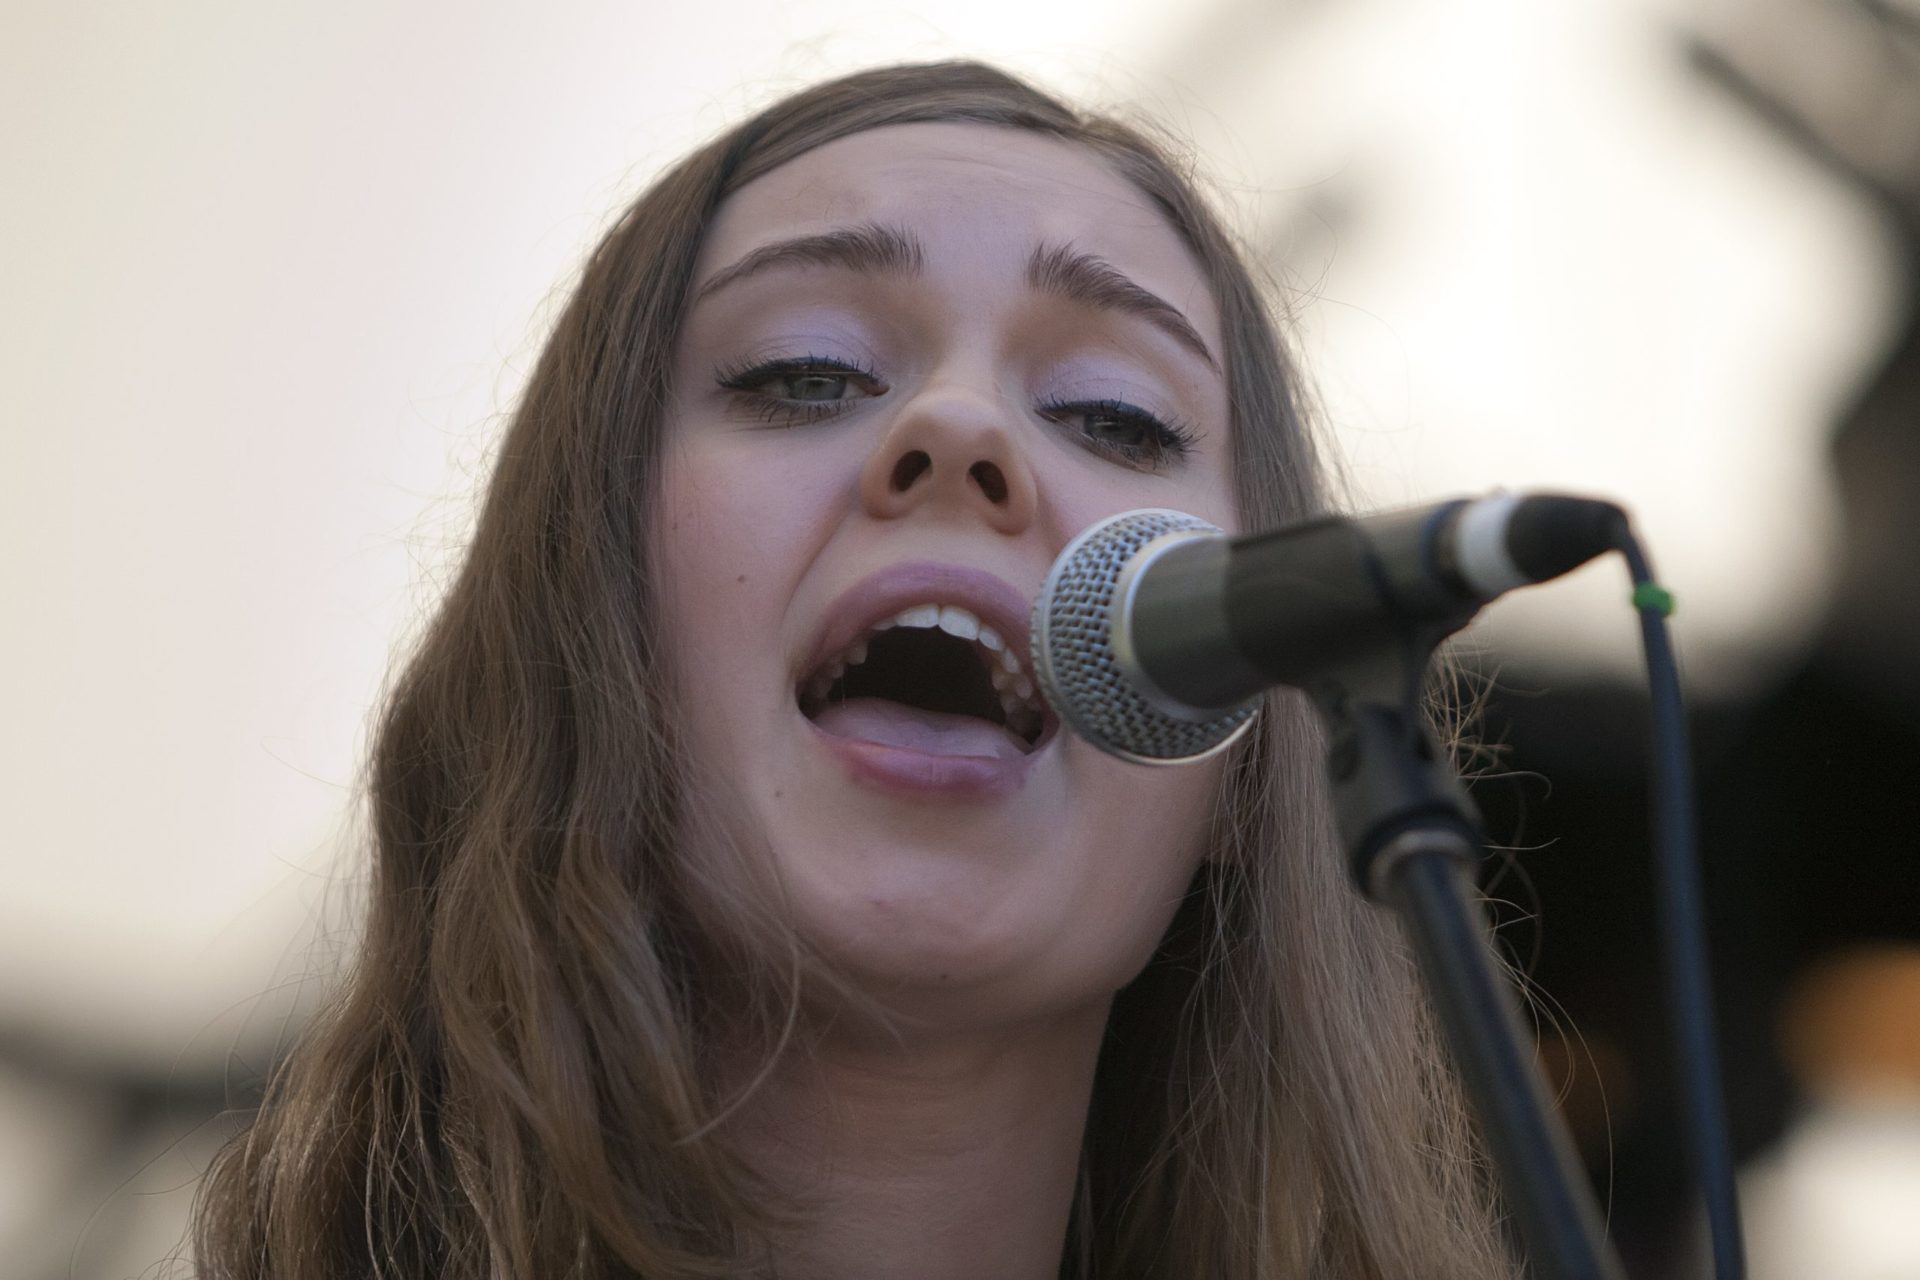 First Aid Kit @ Womad, March ’12